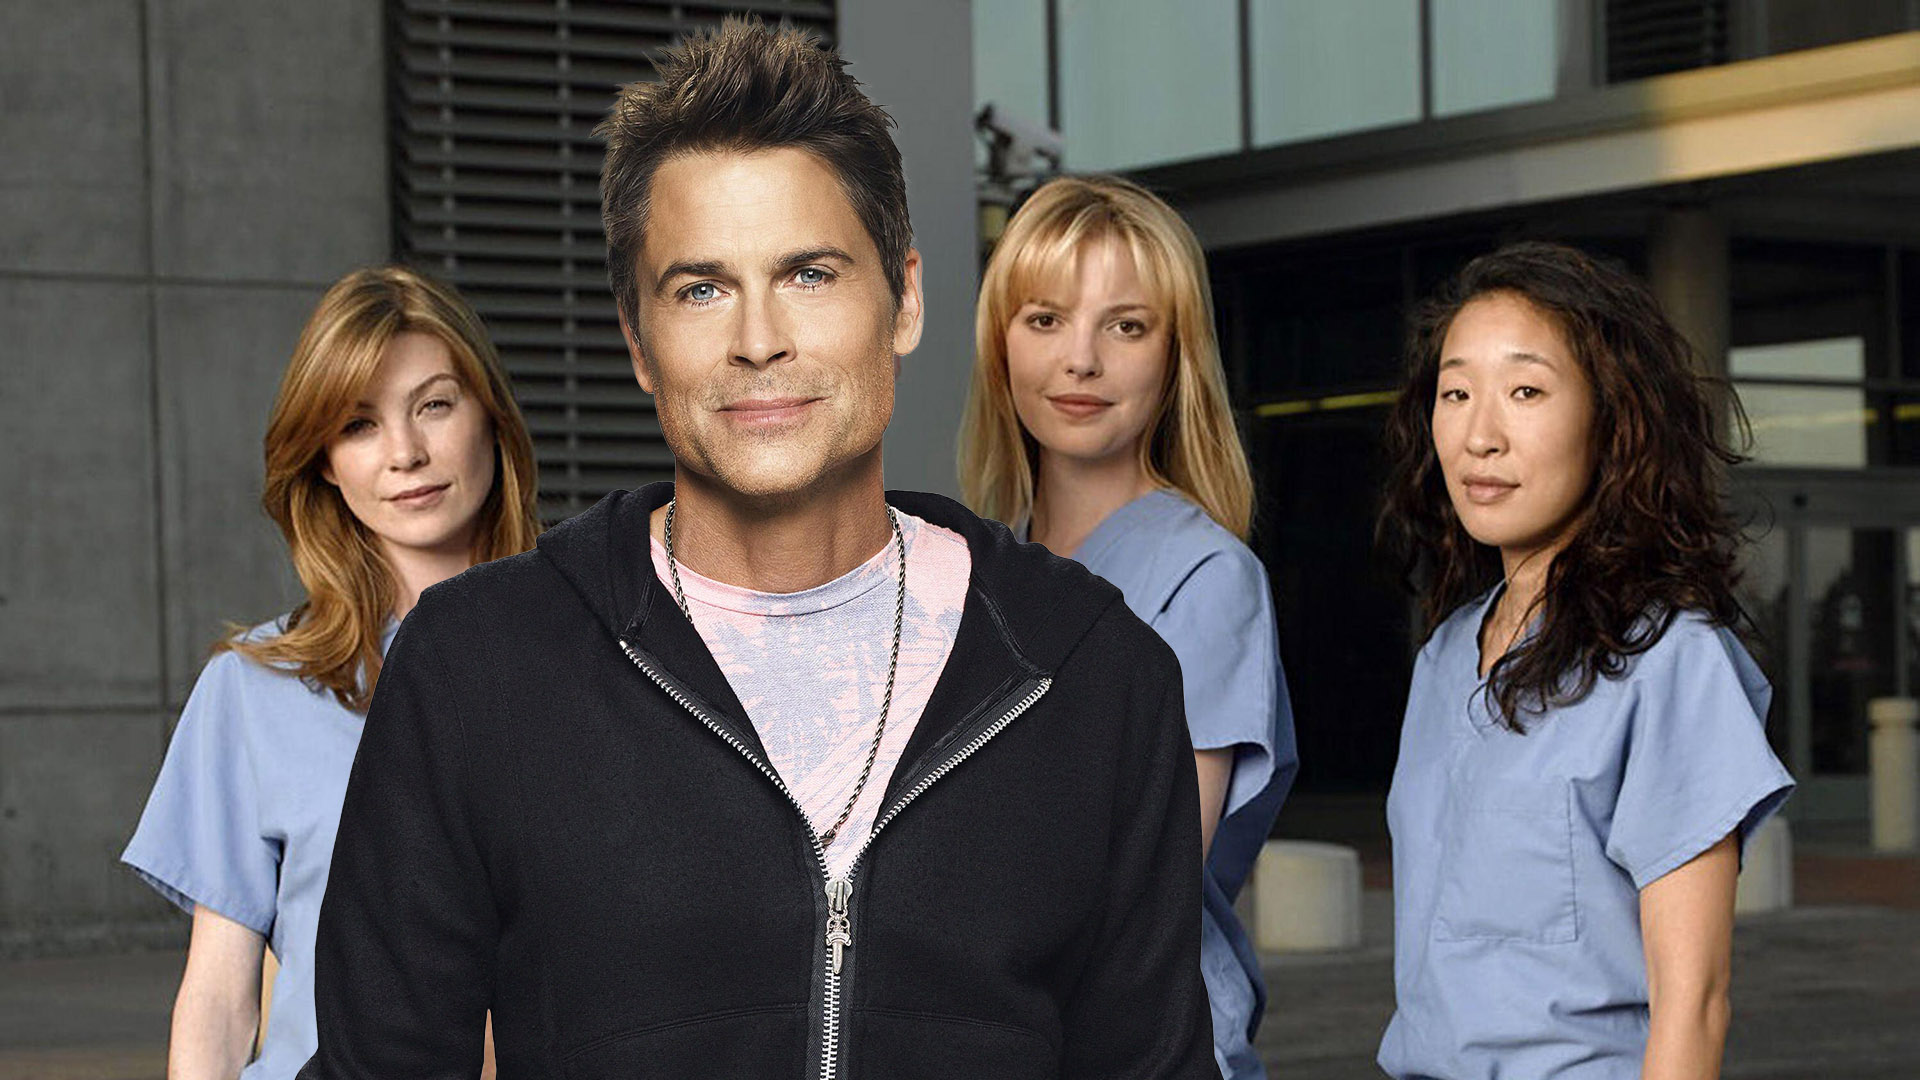 Rob Lowe Turned Down a $70 Million Role on Grey's Anatomy (But He's Surprisingly Chill About it)